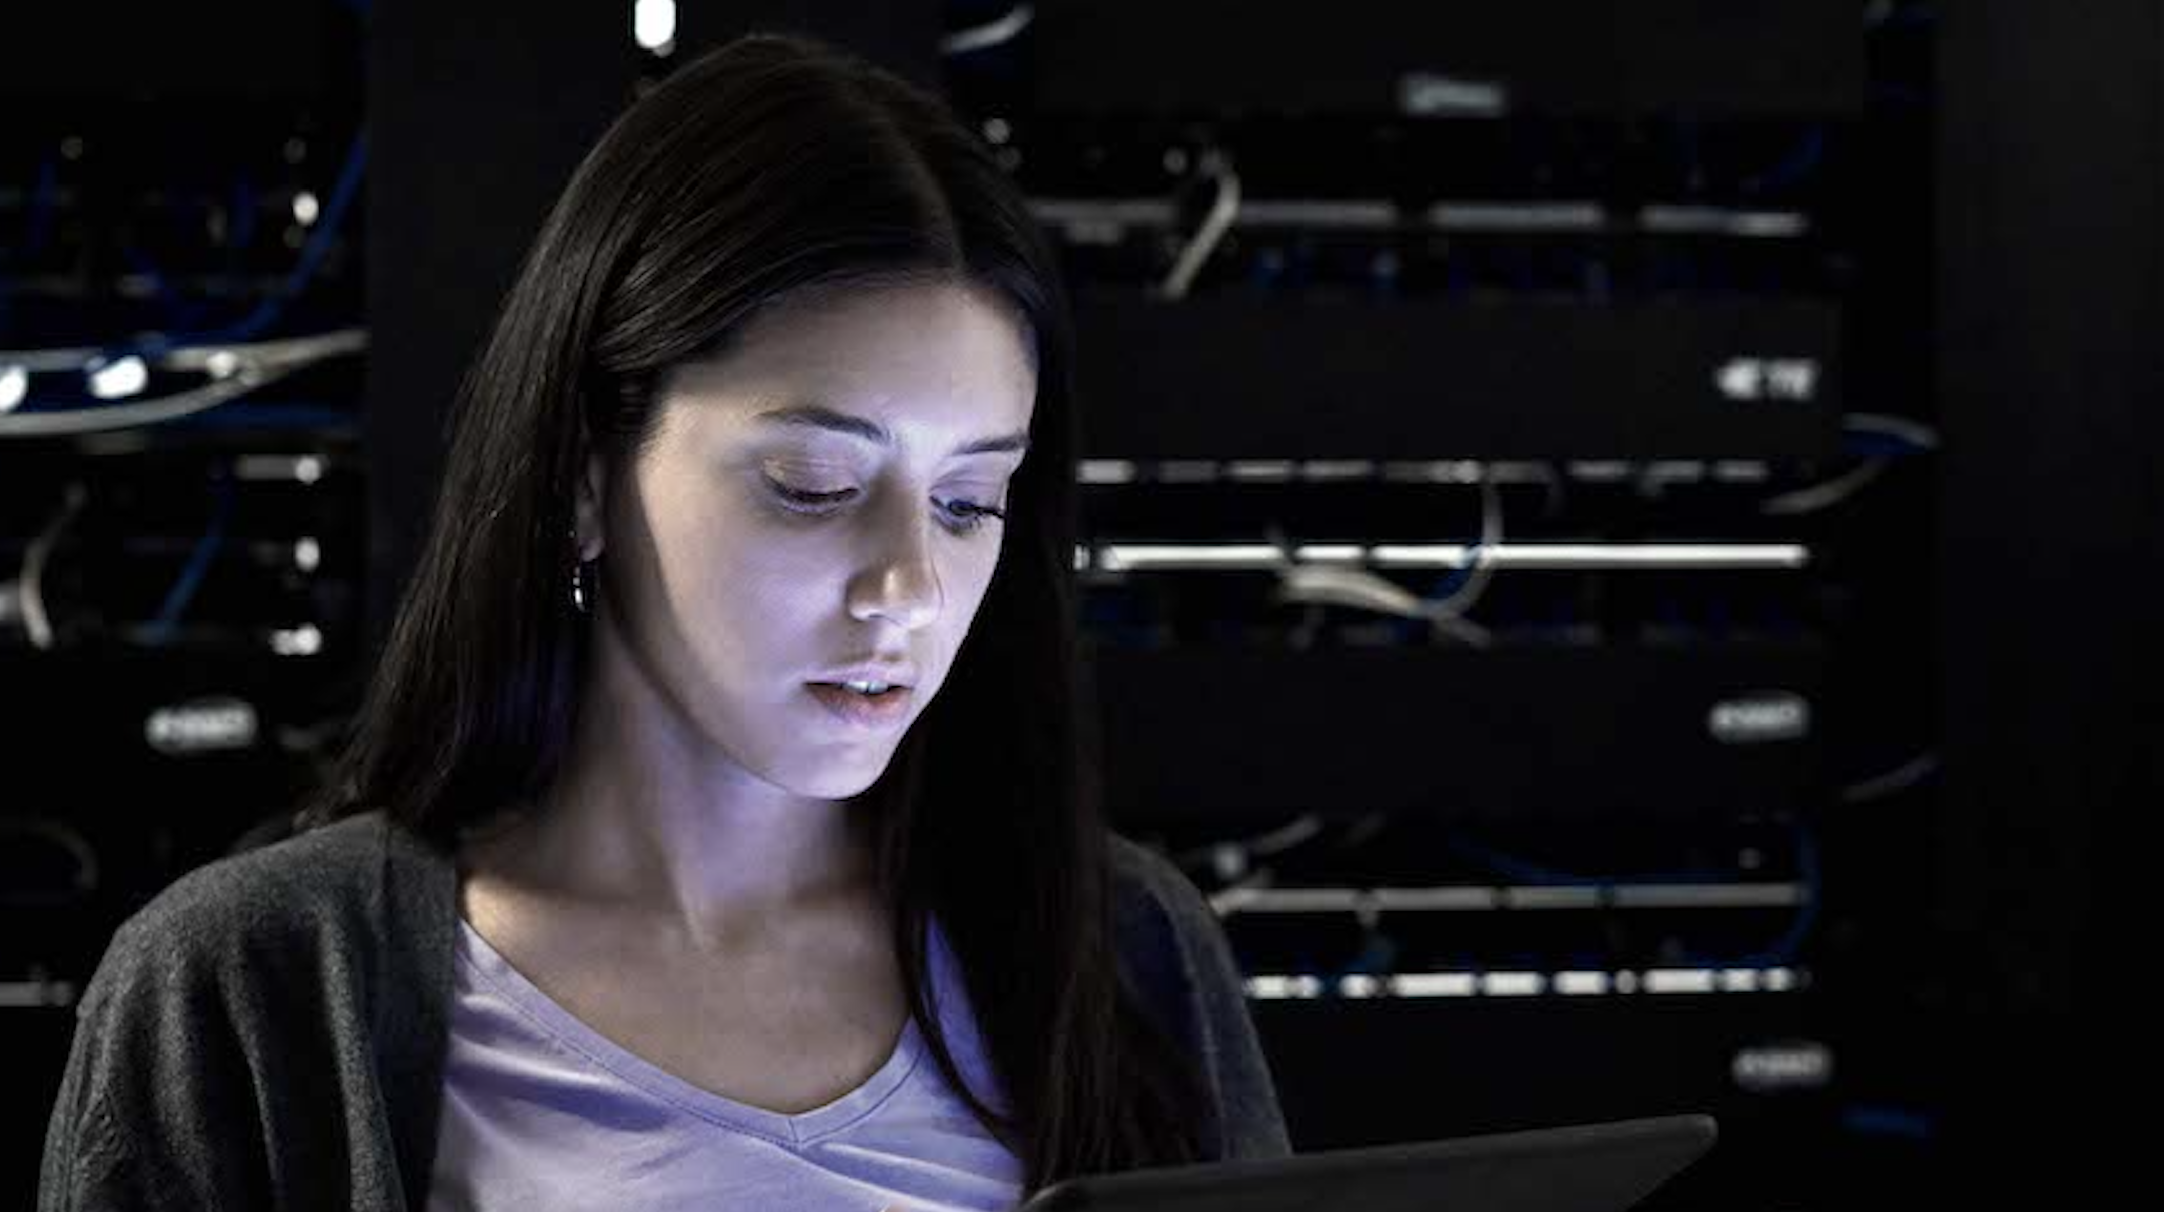 Photo of a young woman with long dark hair looking down at a laptop.